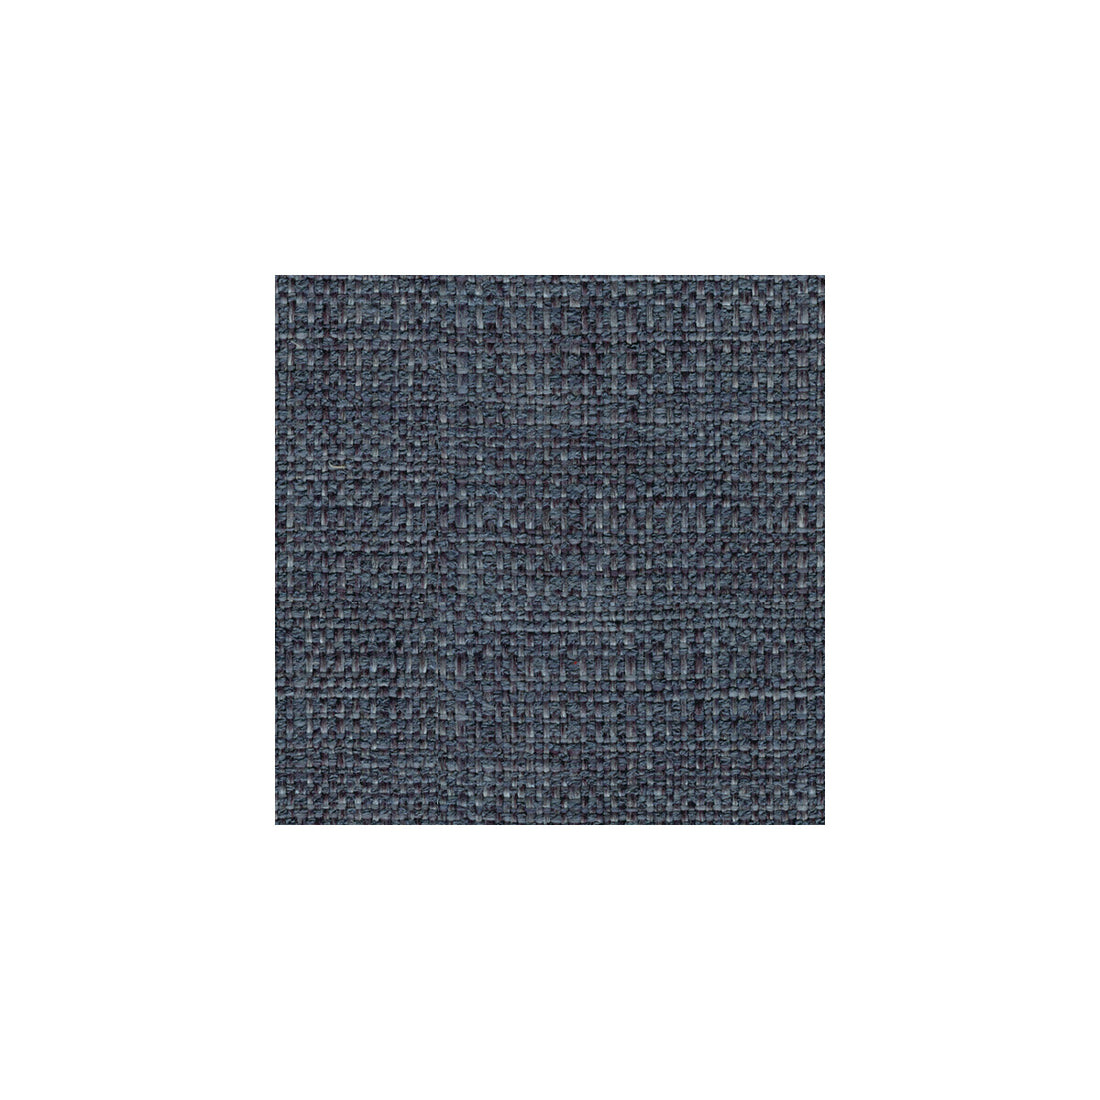 Kravet Contract fabric in 32020-5 color - pattern 32020.5.0 - by Kravet Contract